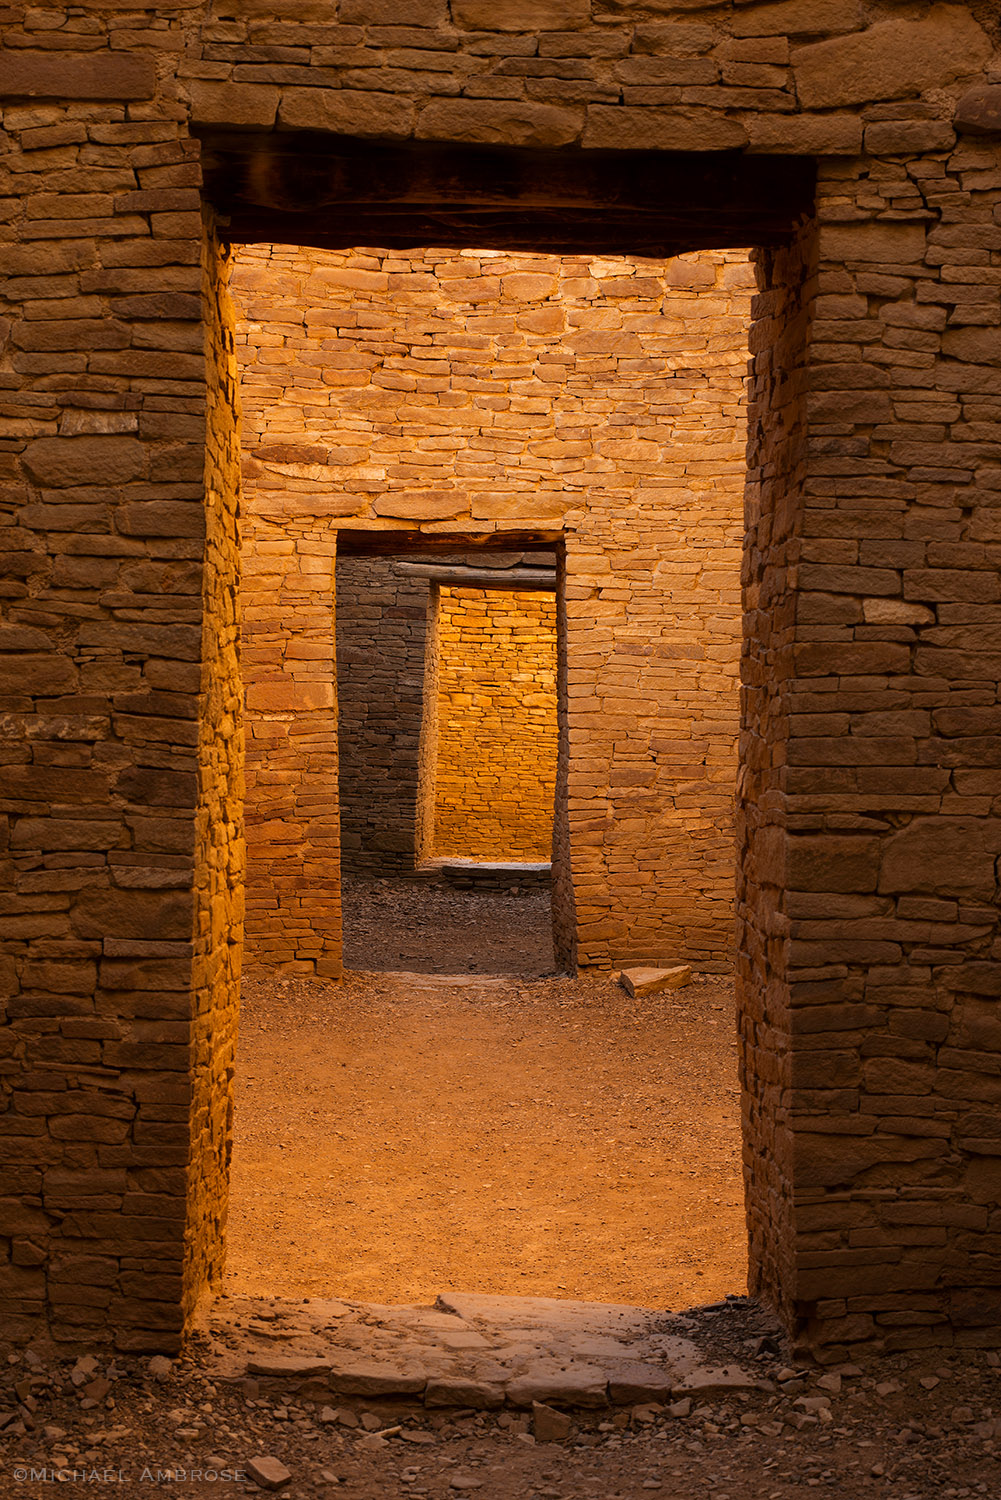 Ancient doorway into rich Native American culture at Chaco Culture National Historic Park in New Mexico.